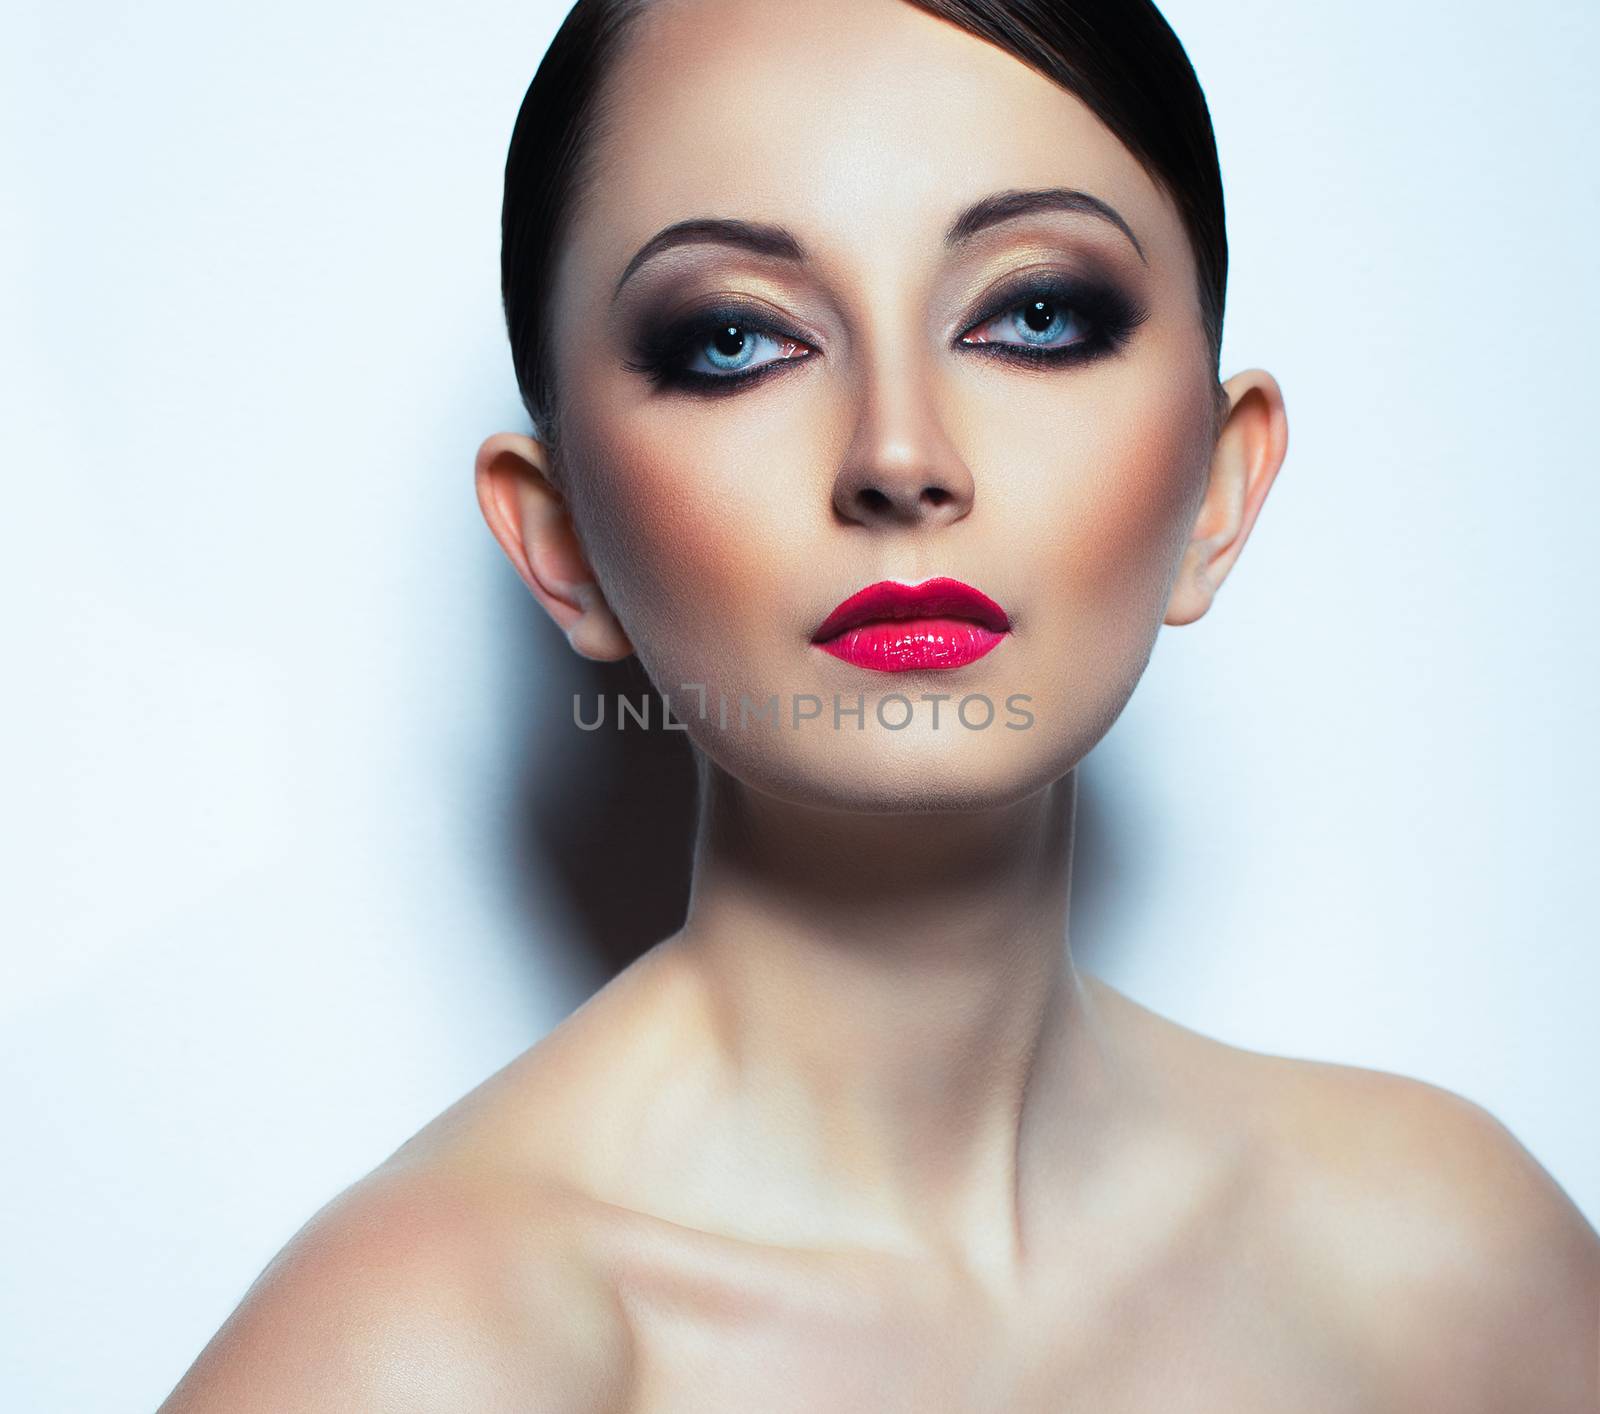 Portrait of a beautiful woman with a glamorous retro makeup by vlad_star